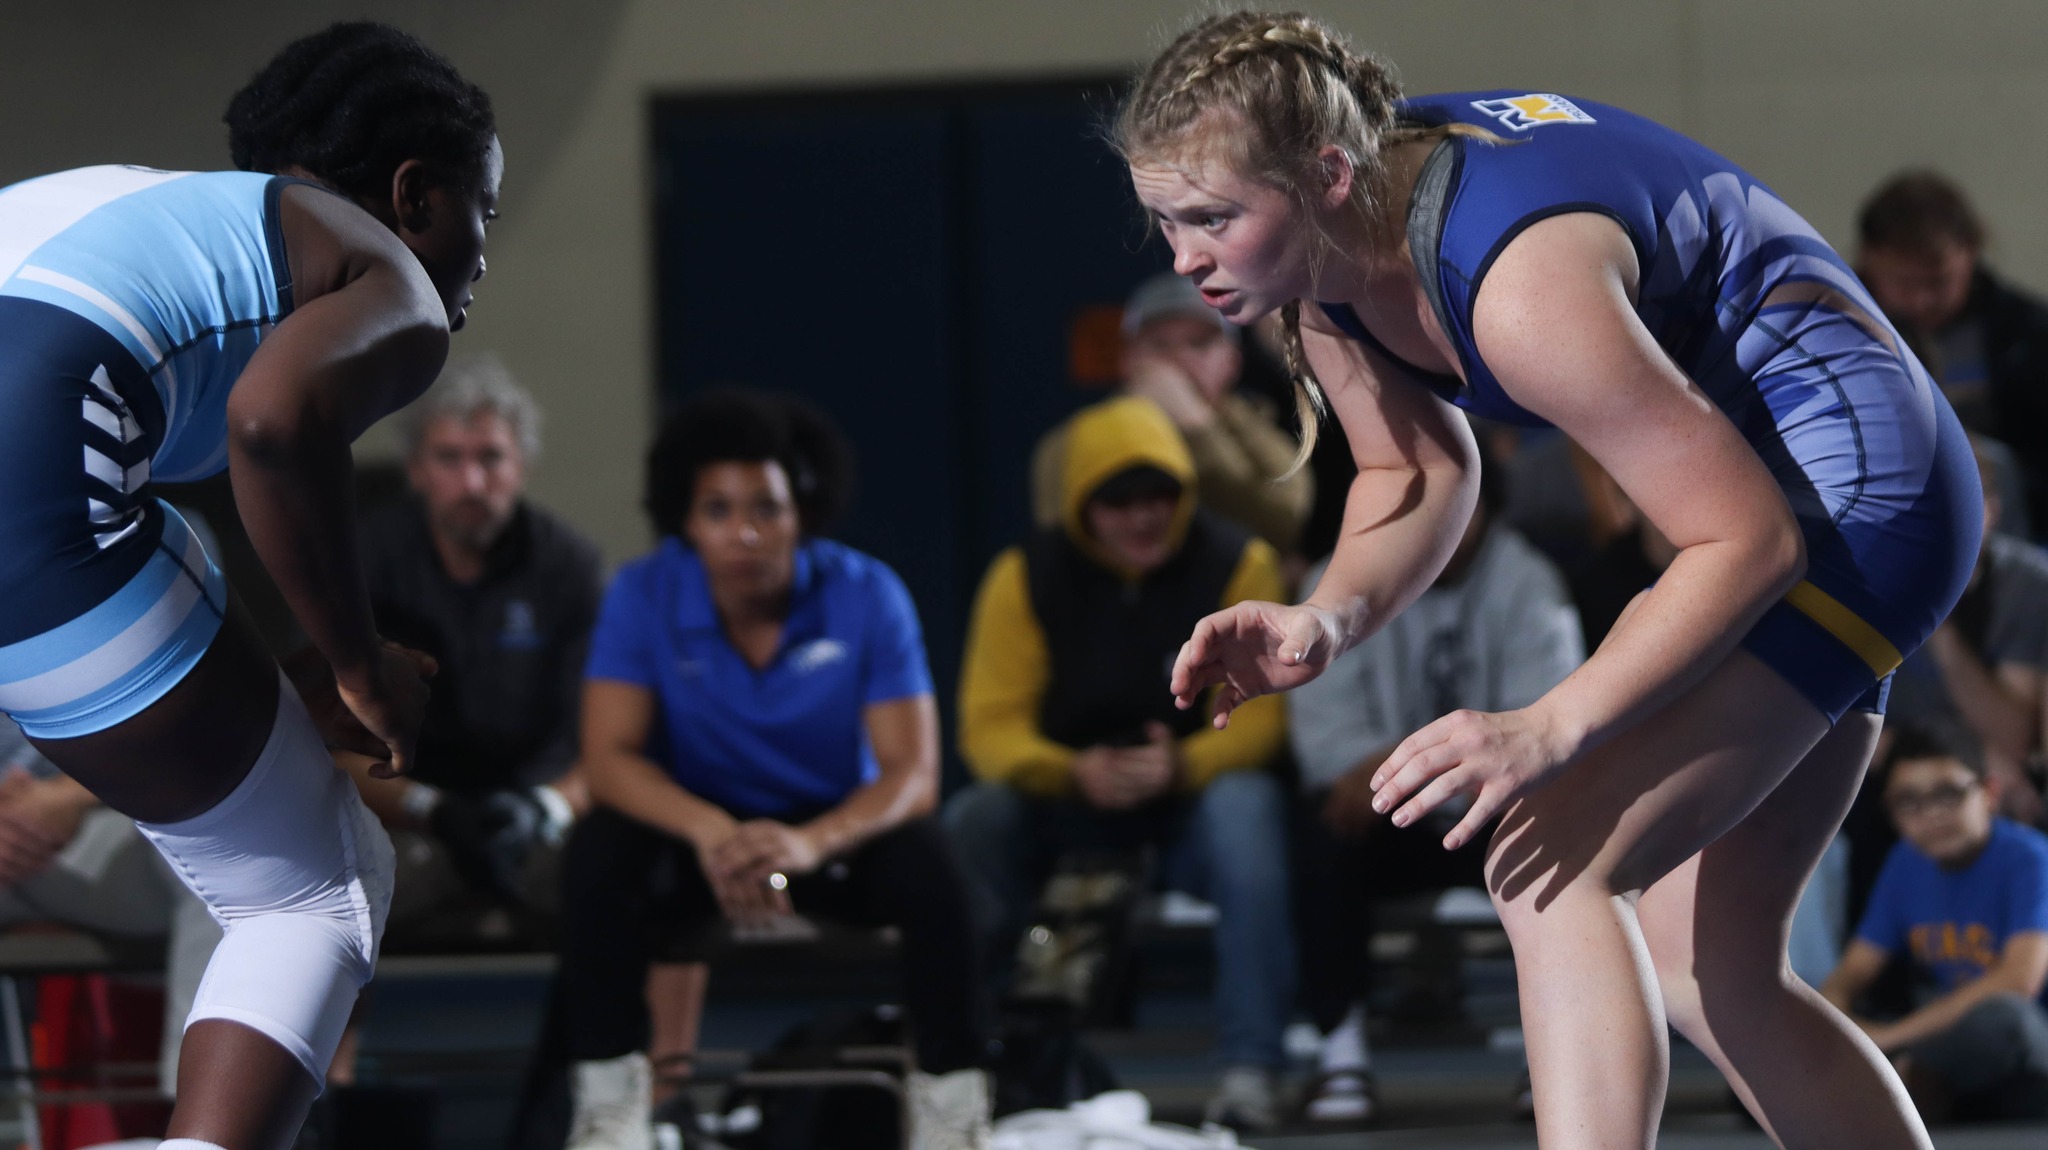 NIACC's Laken Lienhard is ranked No. 1 heading into the upcoming NJCAA Women's Wrestling Invitational.